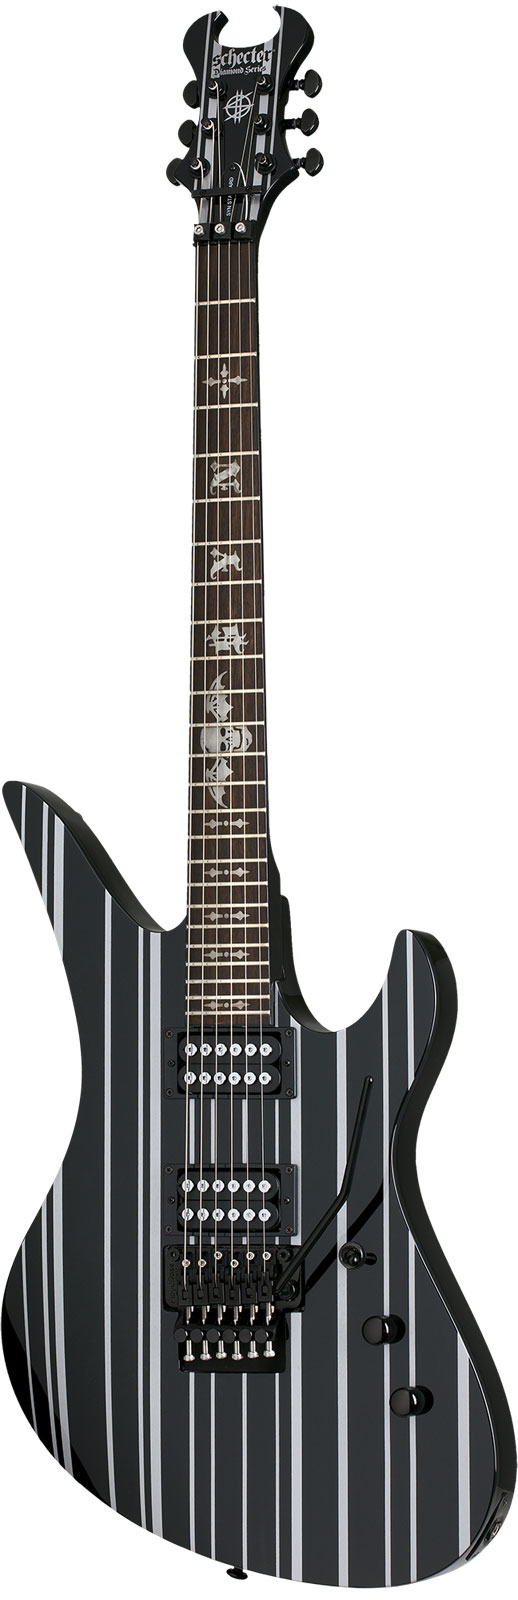 SCHECTER STANDARD SYNYSTER GATE SIGNATURE BLACK